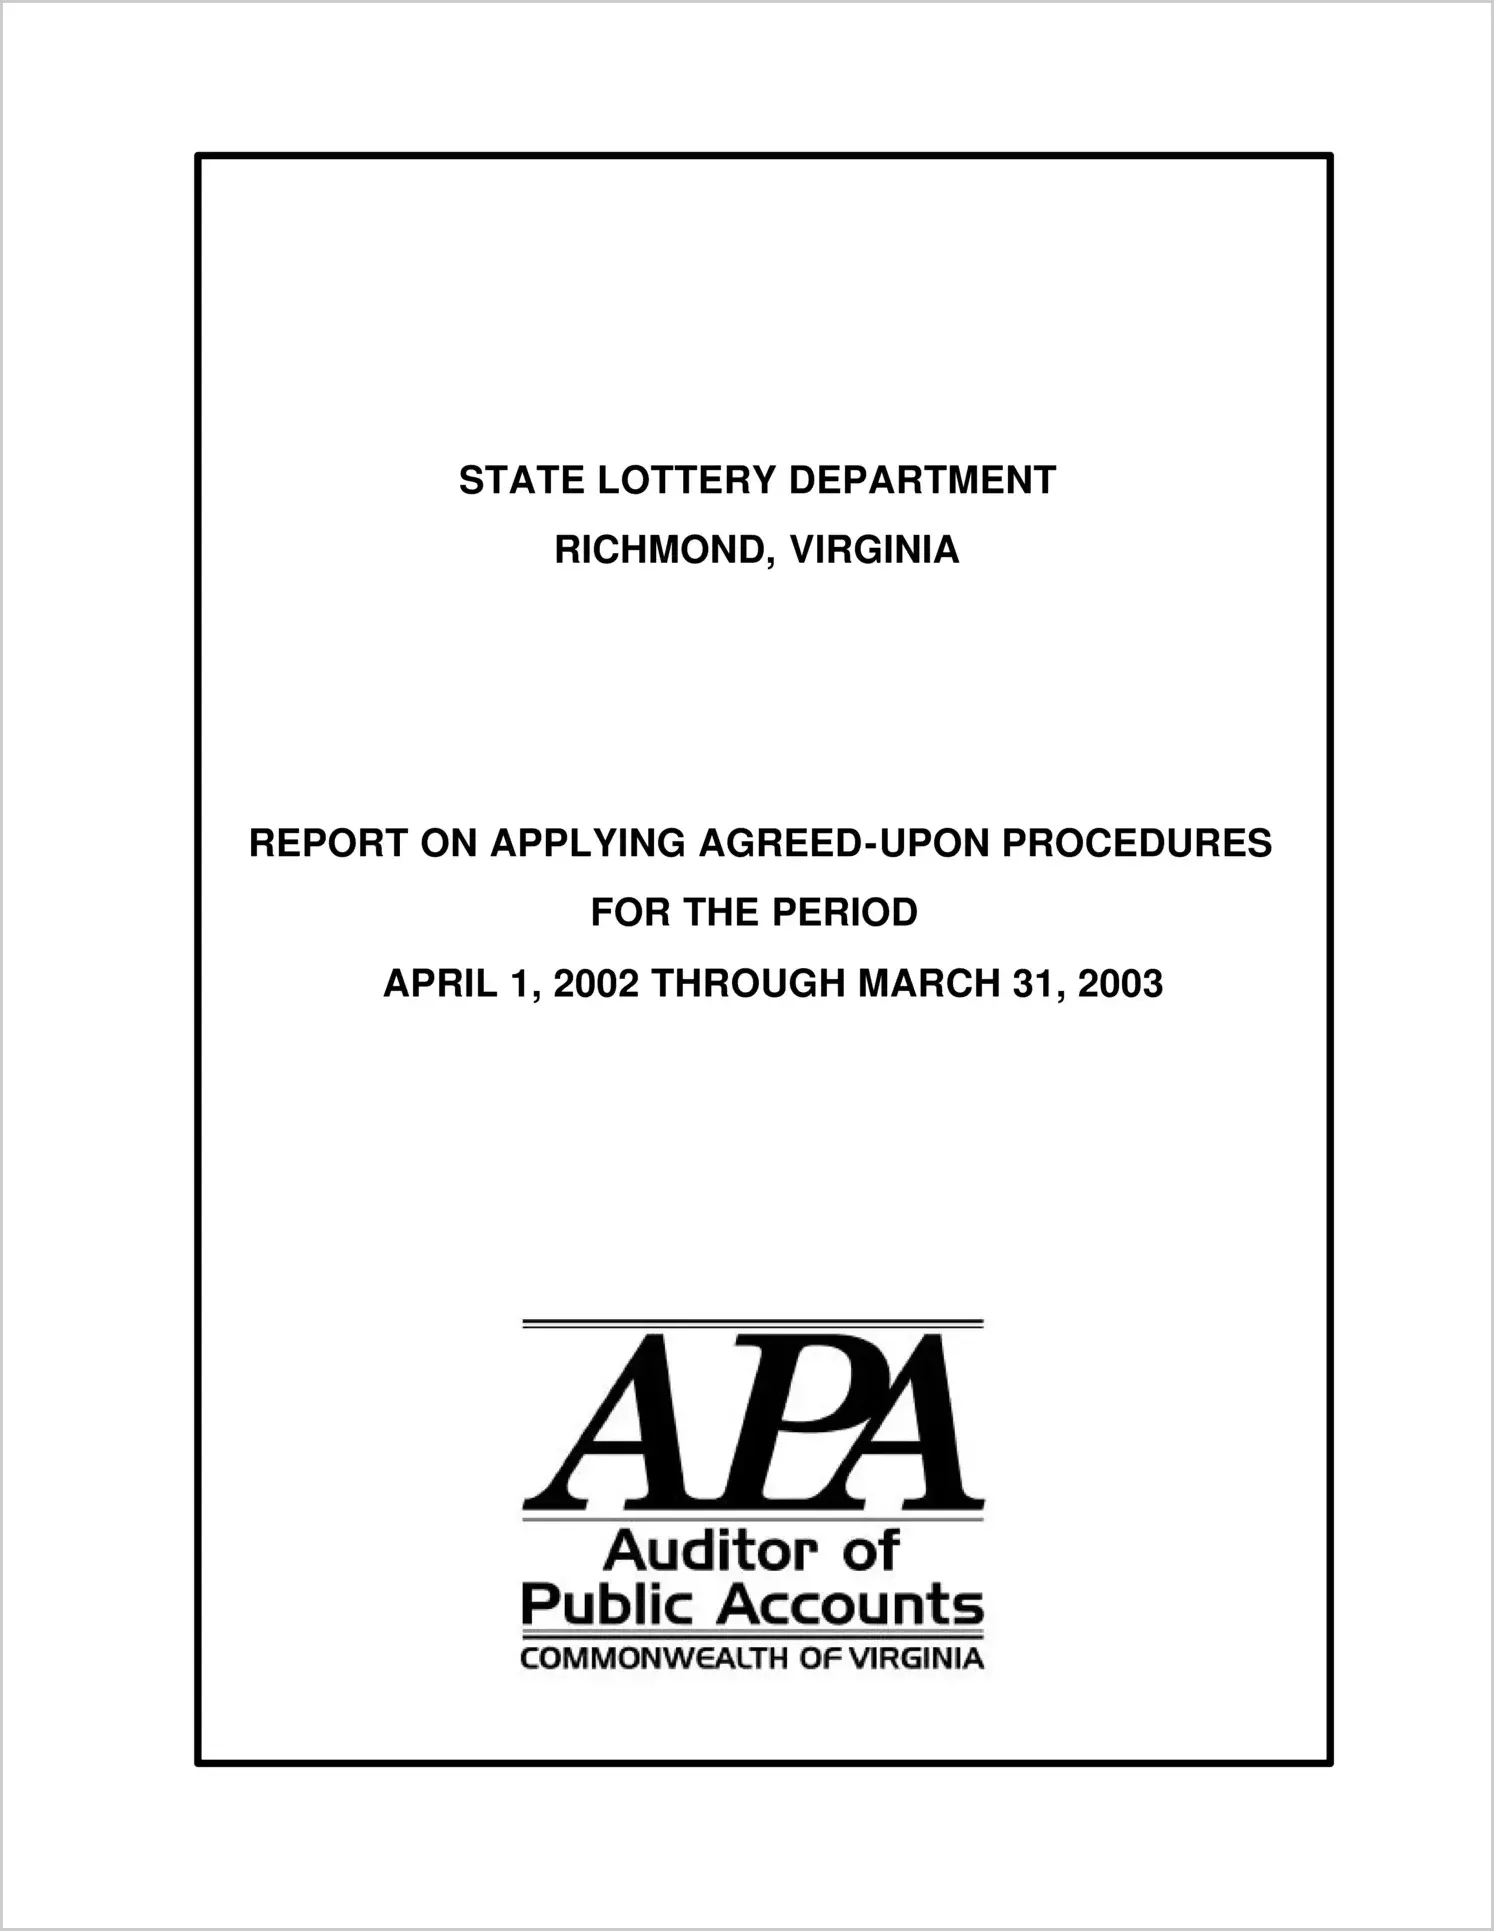 Special ReportState Lottery Department Report on Applying Agreed-Upon Procedures (Mega Millions) (Report Period: 4/1/02 - 3/31/03)